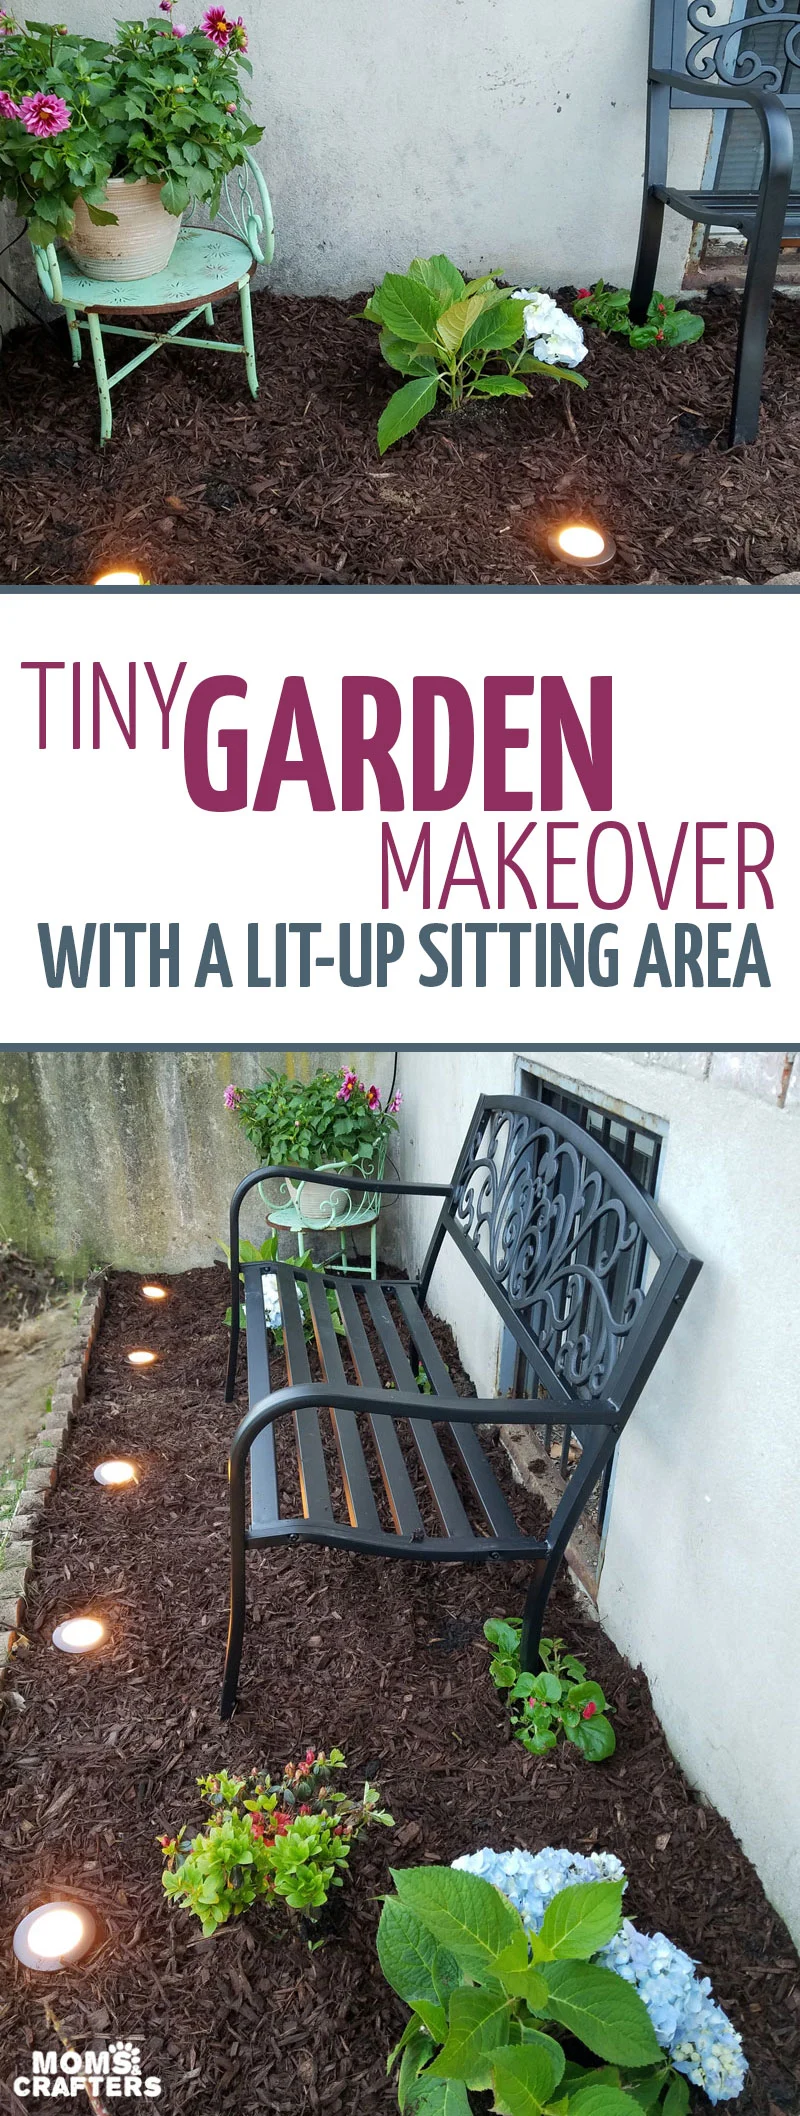 You'll love this tiny garden makeover featuring a sweet eclectic sitting area. This city garden idea is perfect for tiny spaces and includes a parkbench. This DIY lawn and garden makeover was simple and easy to complete #garden #citylife #momsandcrafters